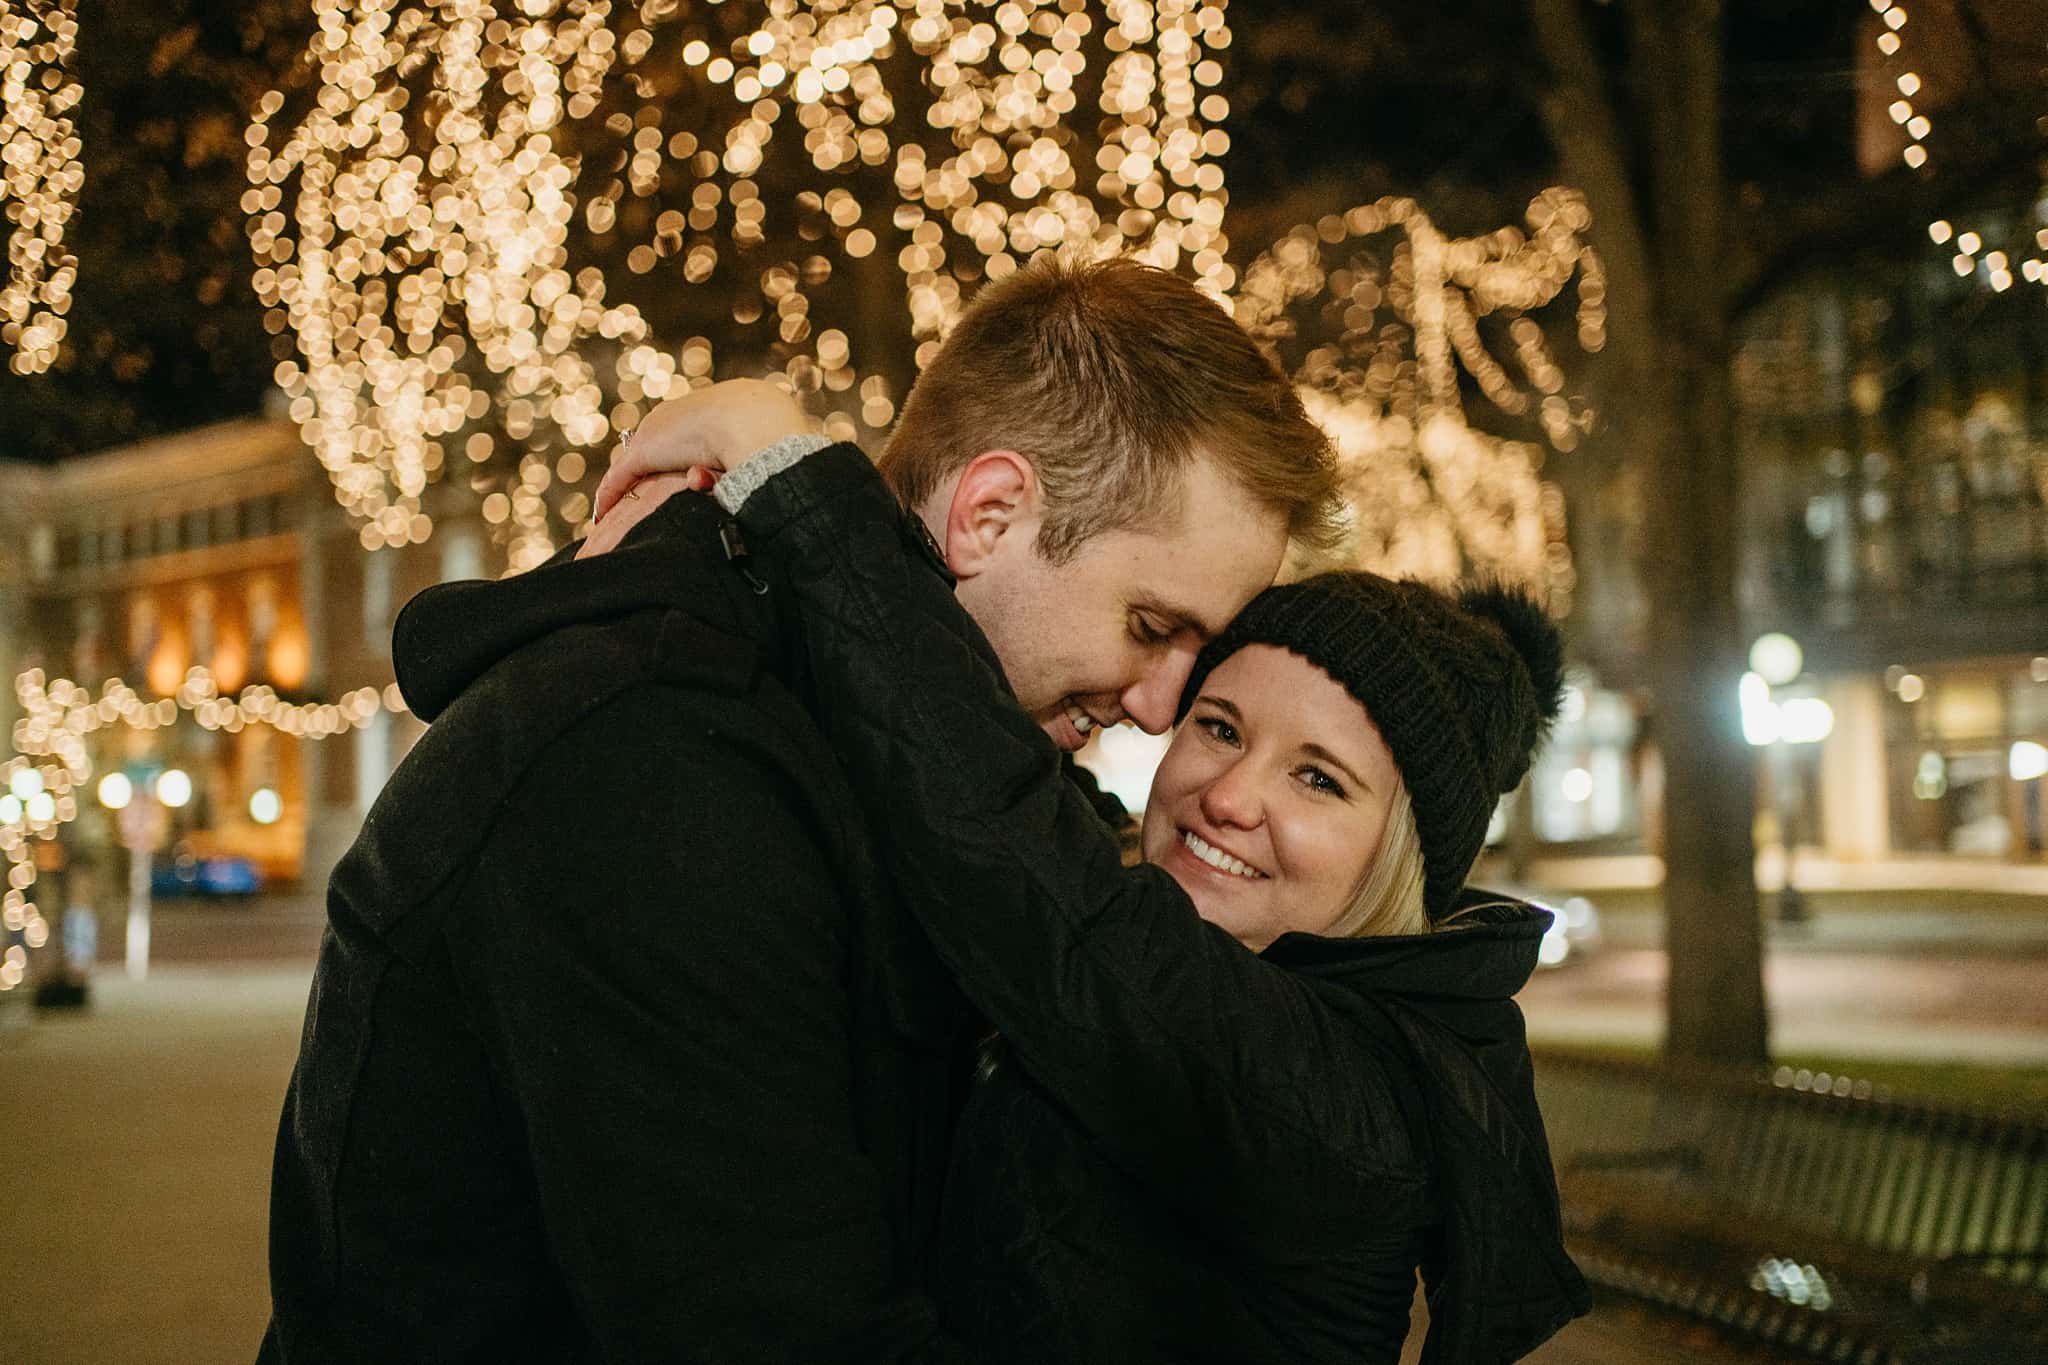 winter surprise proposal with twinkle lights